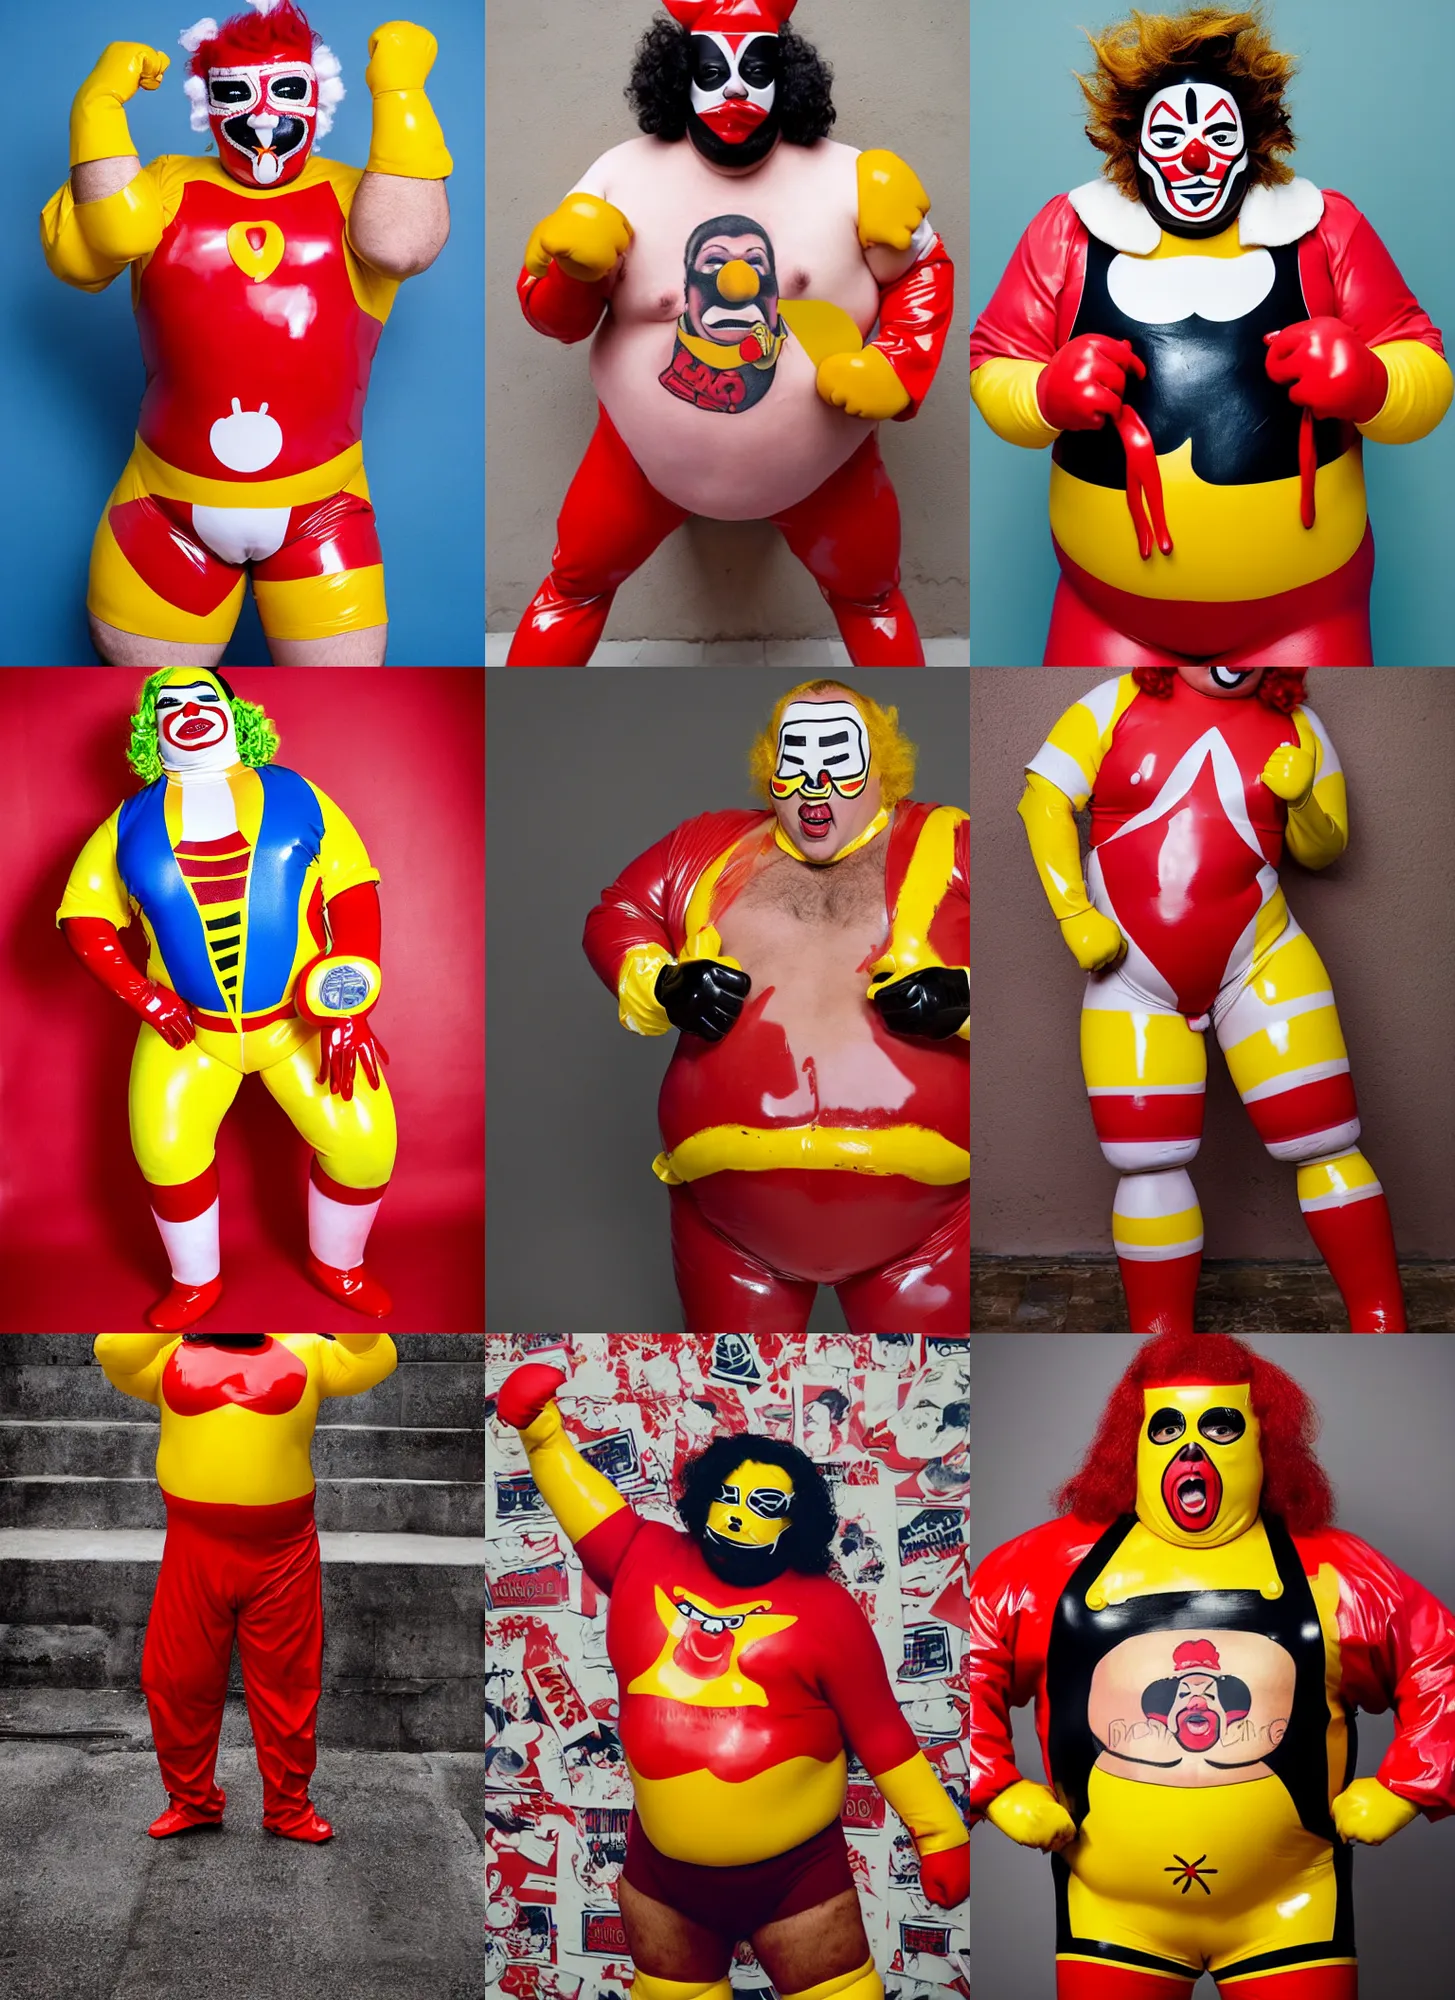 Prompt: portrait of a very chubby looking Lucha libre dressed in Ronald McDonald rubber latex costume with red and white color latex sleeves, hamburger tattoo graphics on bare hairy chest, yellow latex gloves, red Ronald McDonald hair